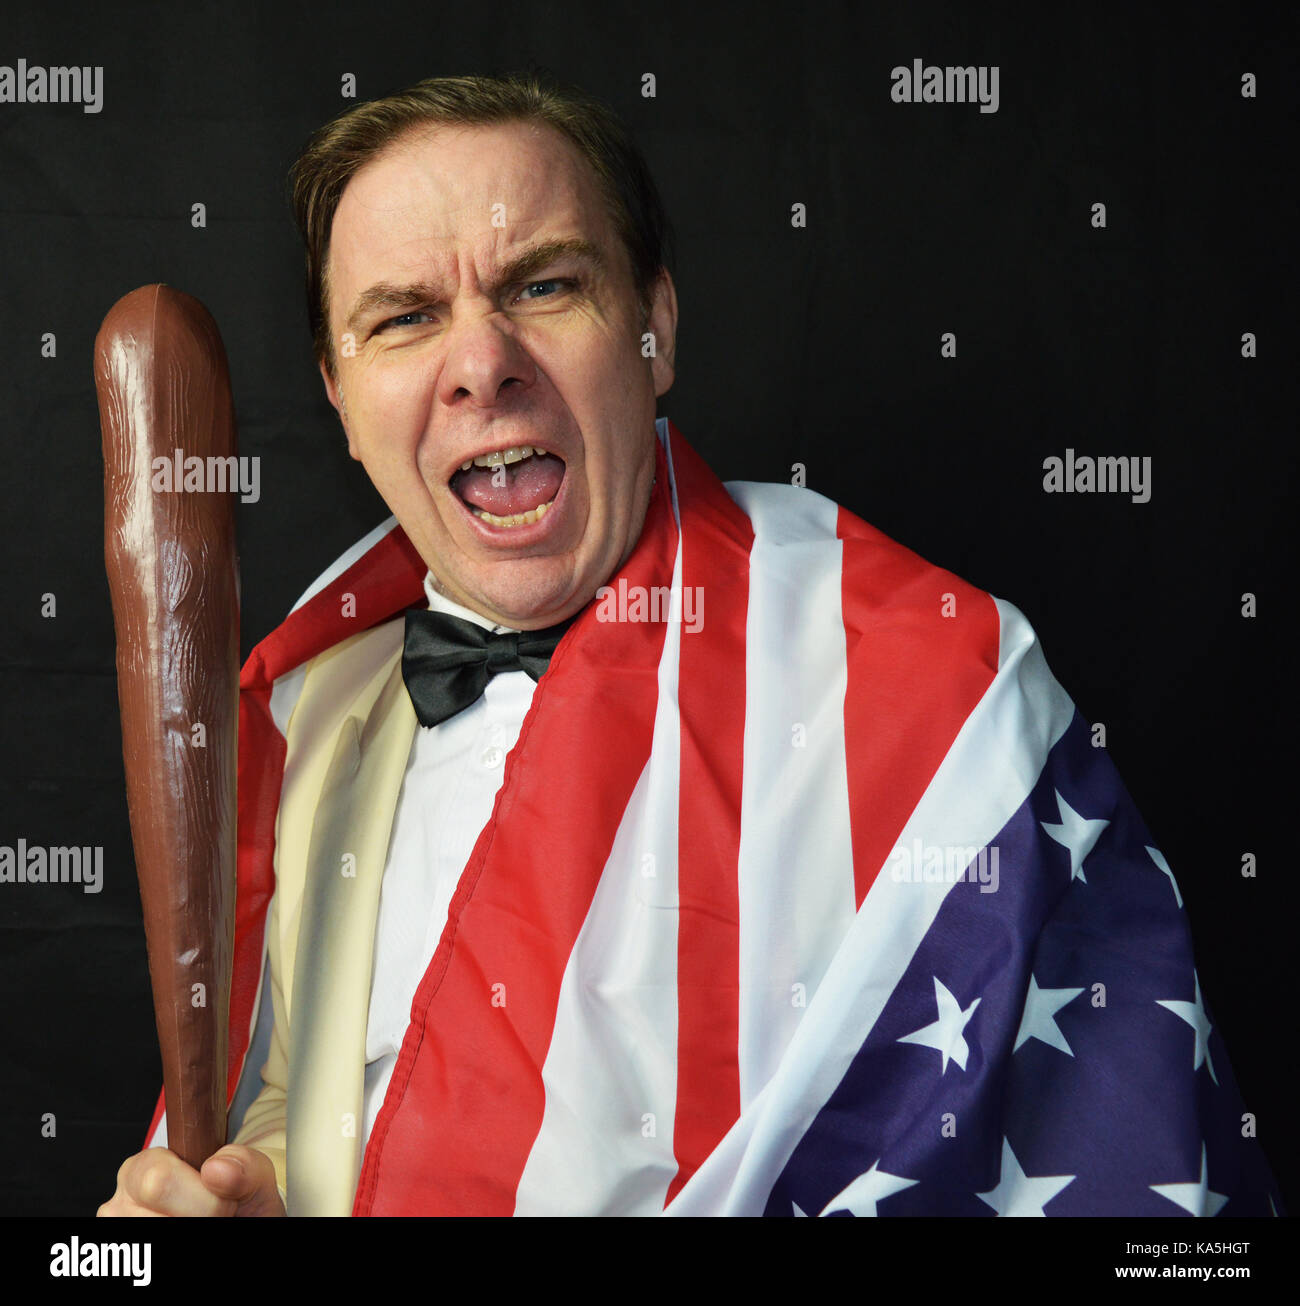 American Politician with flag Stock Photo